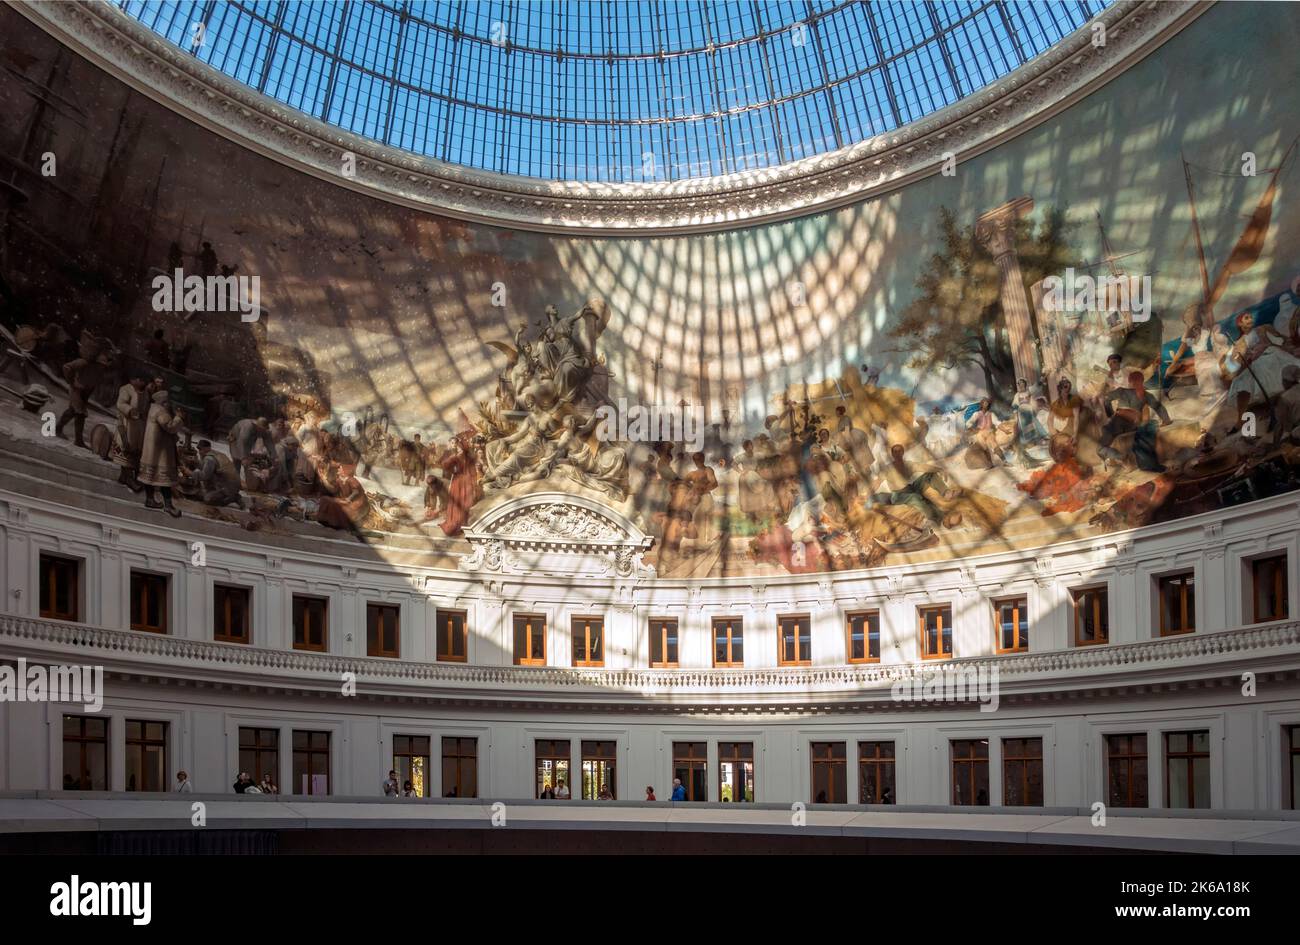 Sunlight shining through the glass dome of the Bourse de Commerce building in Paris, France now the home of the art collection of the Pinault family Stock Photo